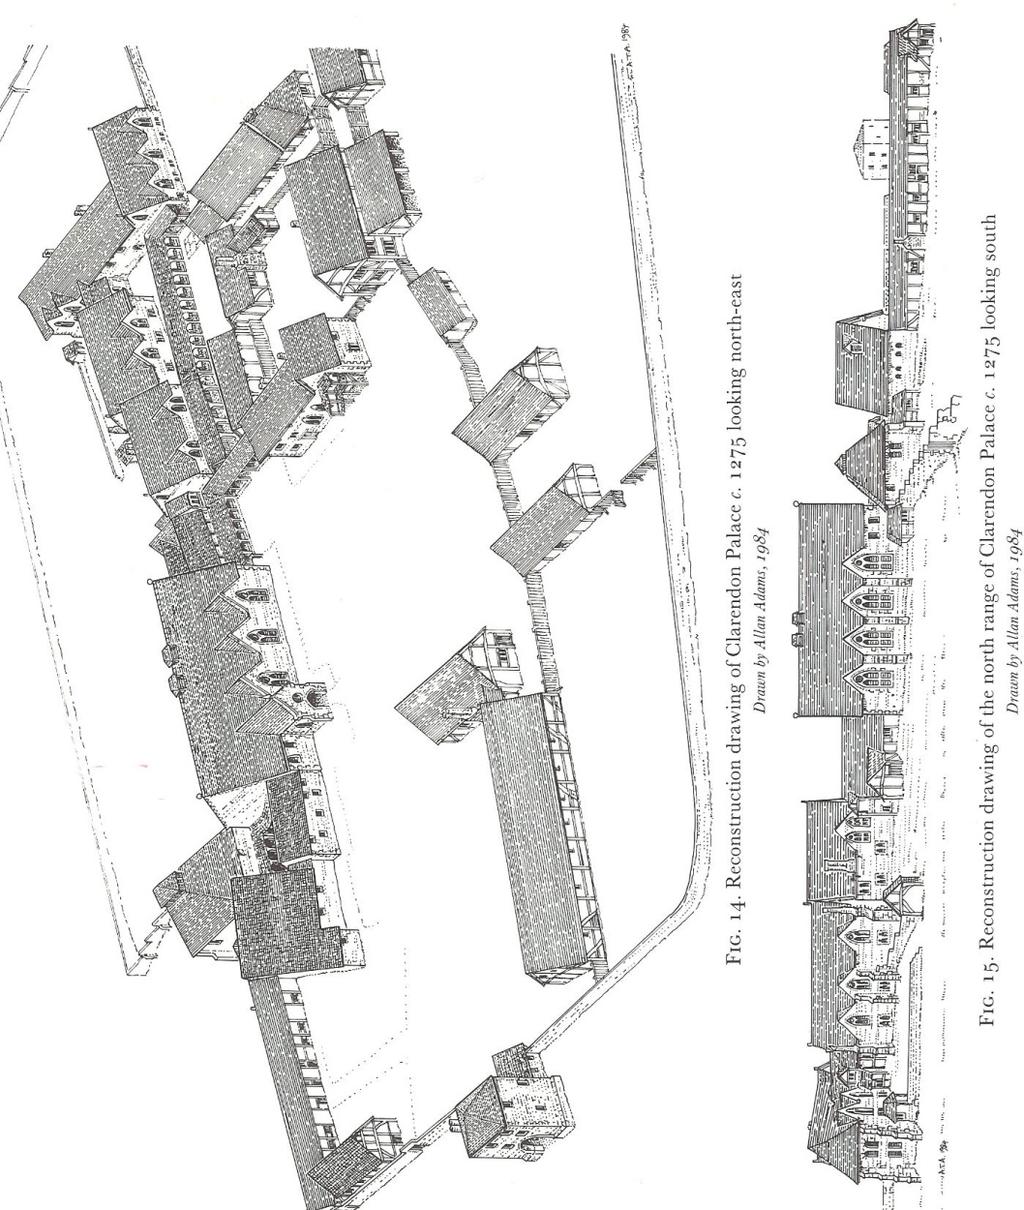 Plan and reconstruction